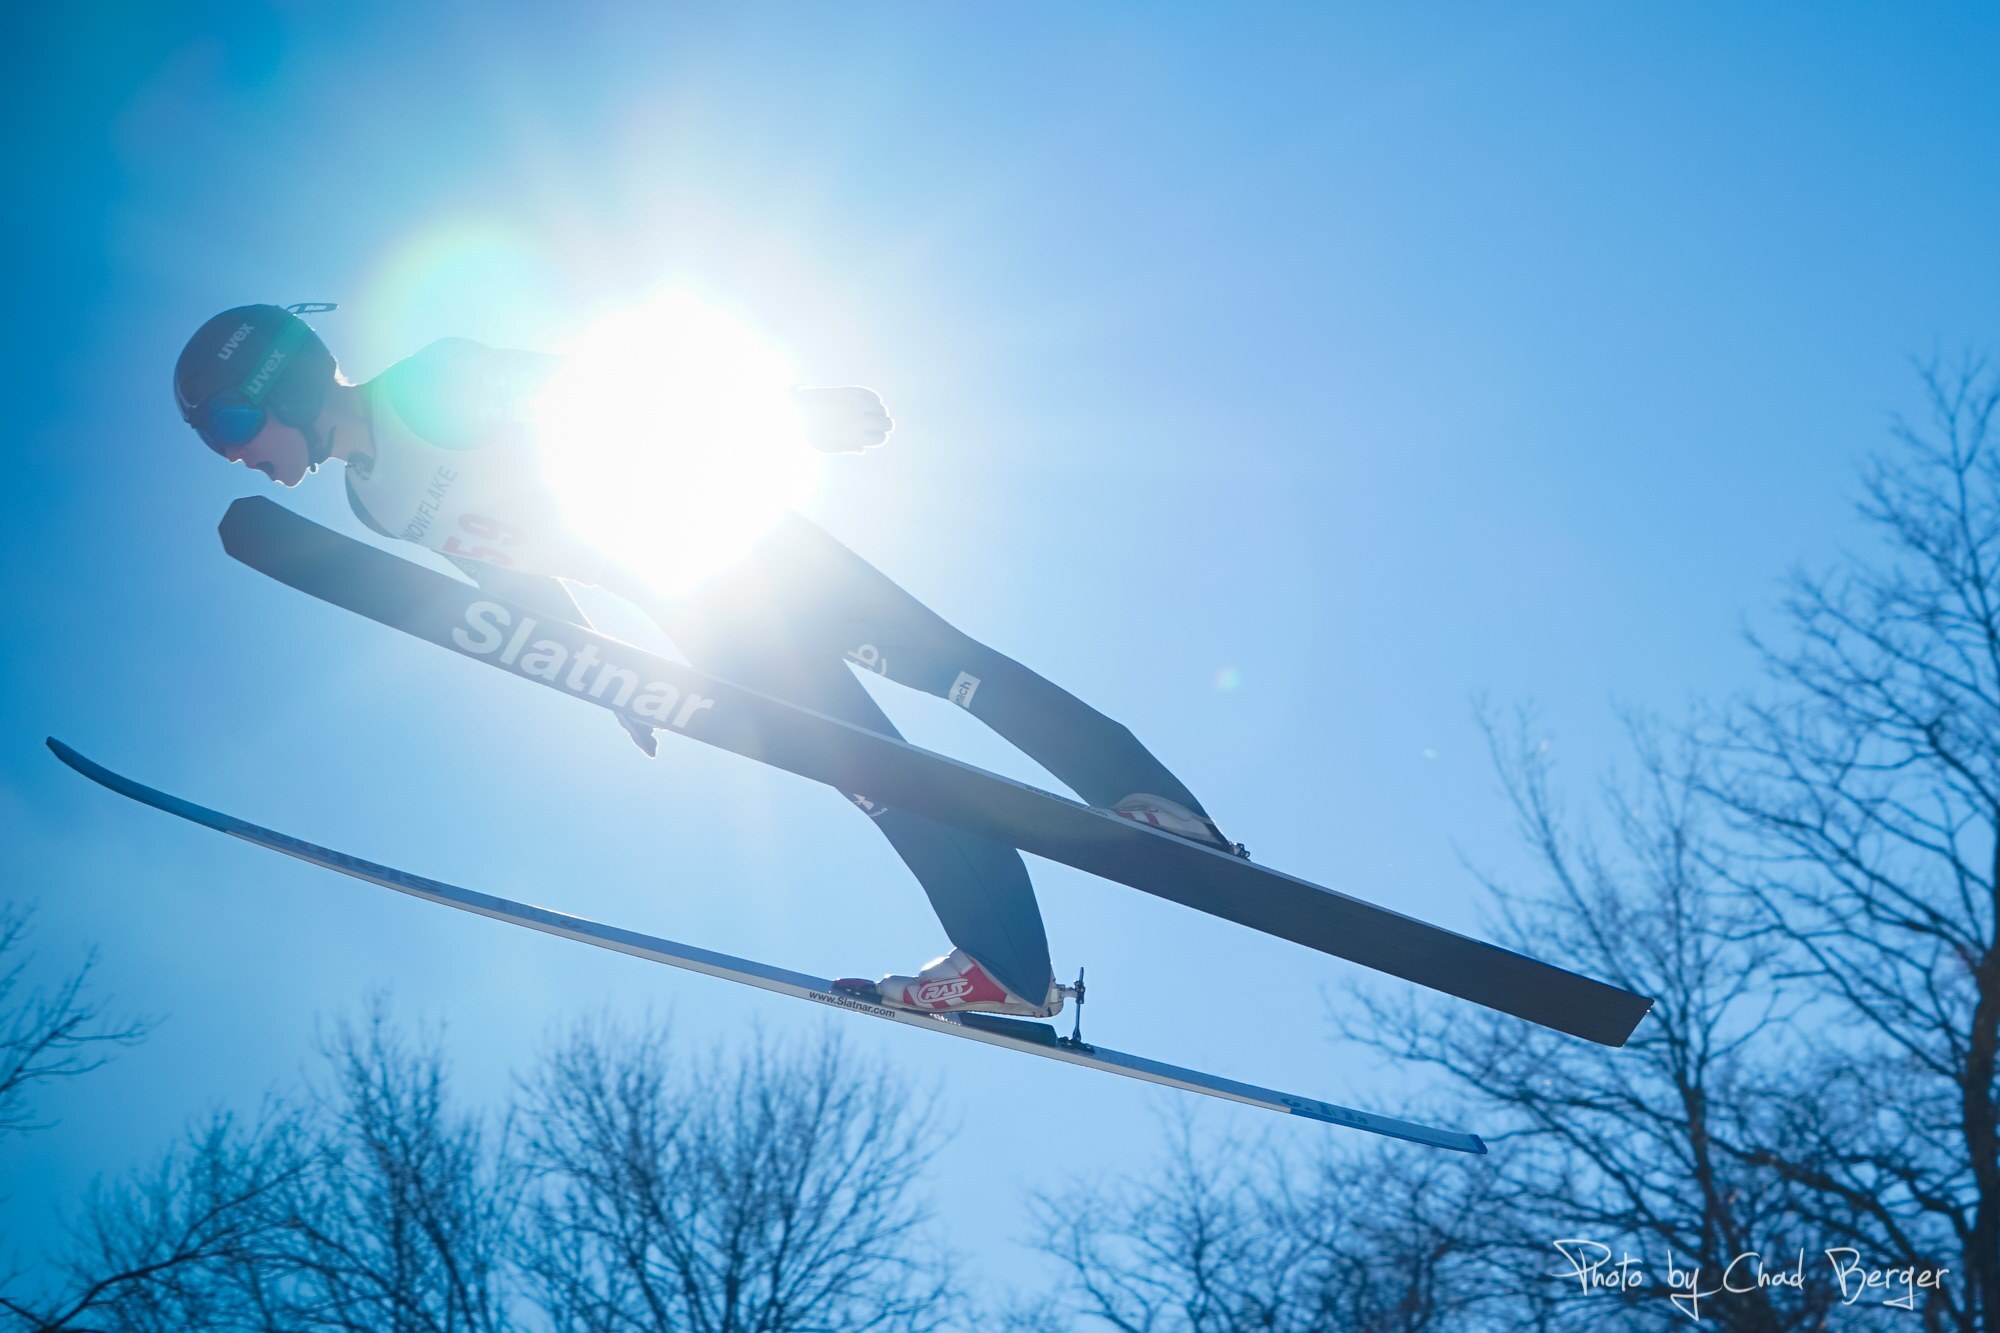 Nejc Toporis from team Slovenia is pictured silhouetted against the sun during a ski jumping competition in Westby, Wisconsin.